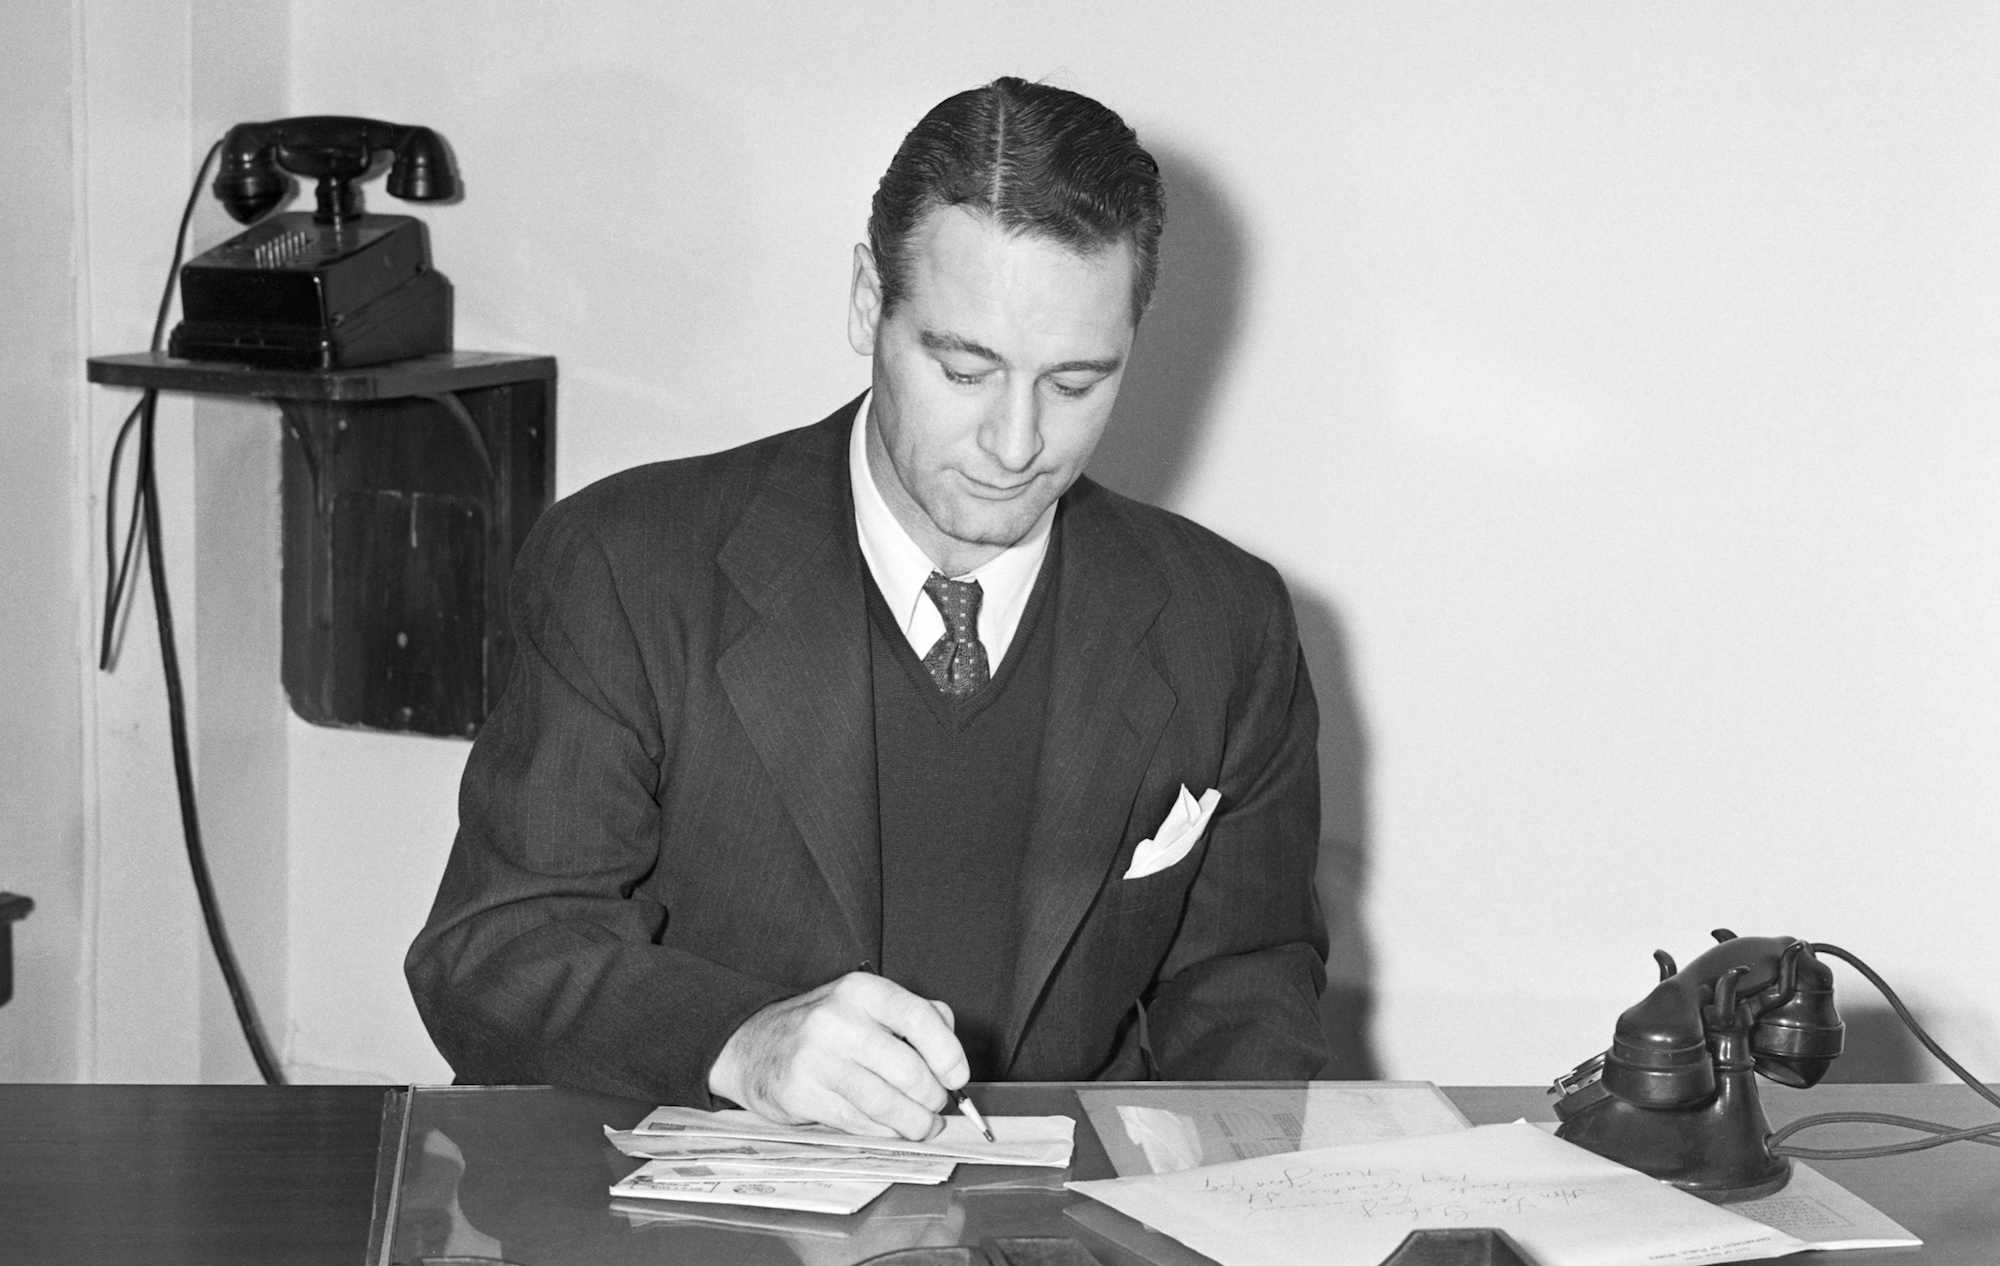 After leaving the New York Yankees, Lou Gehrig took a job with the City of New York.